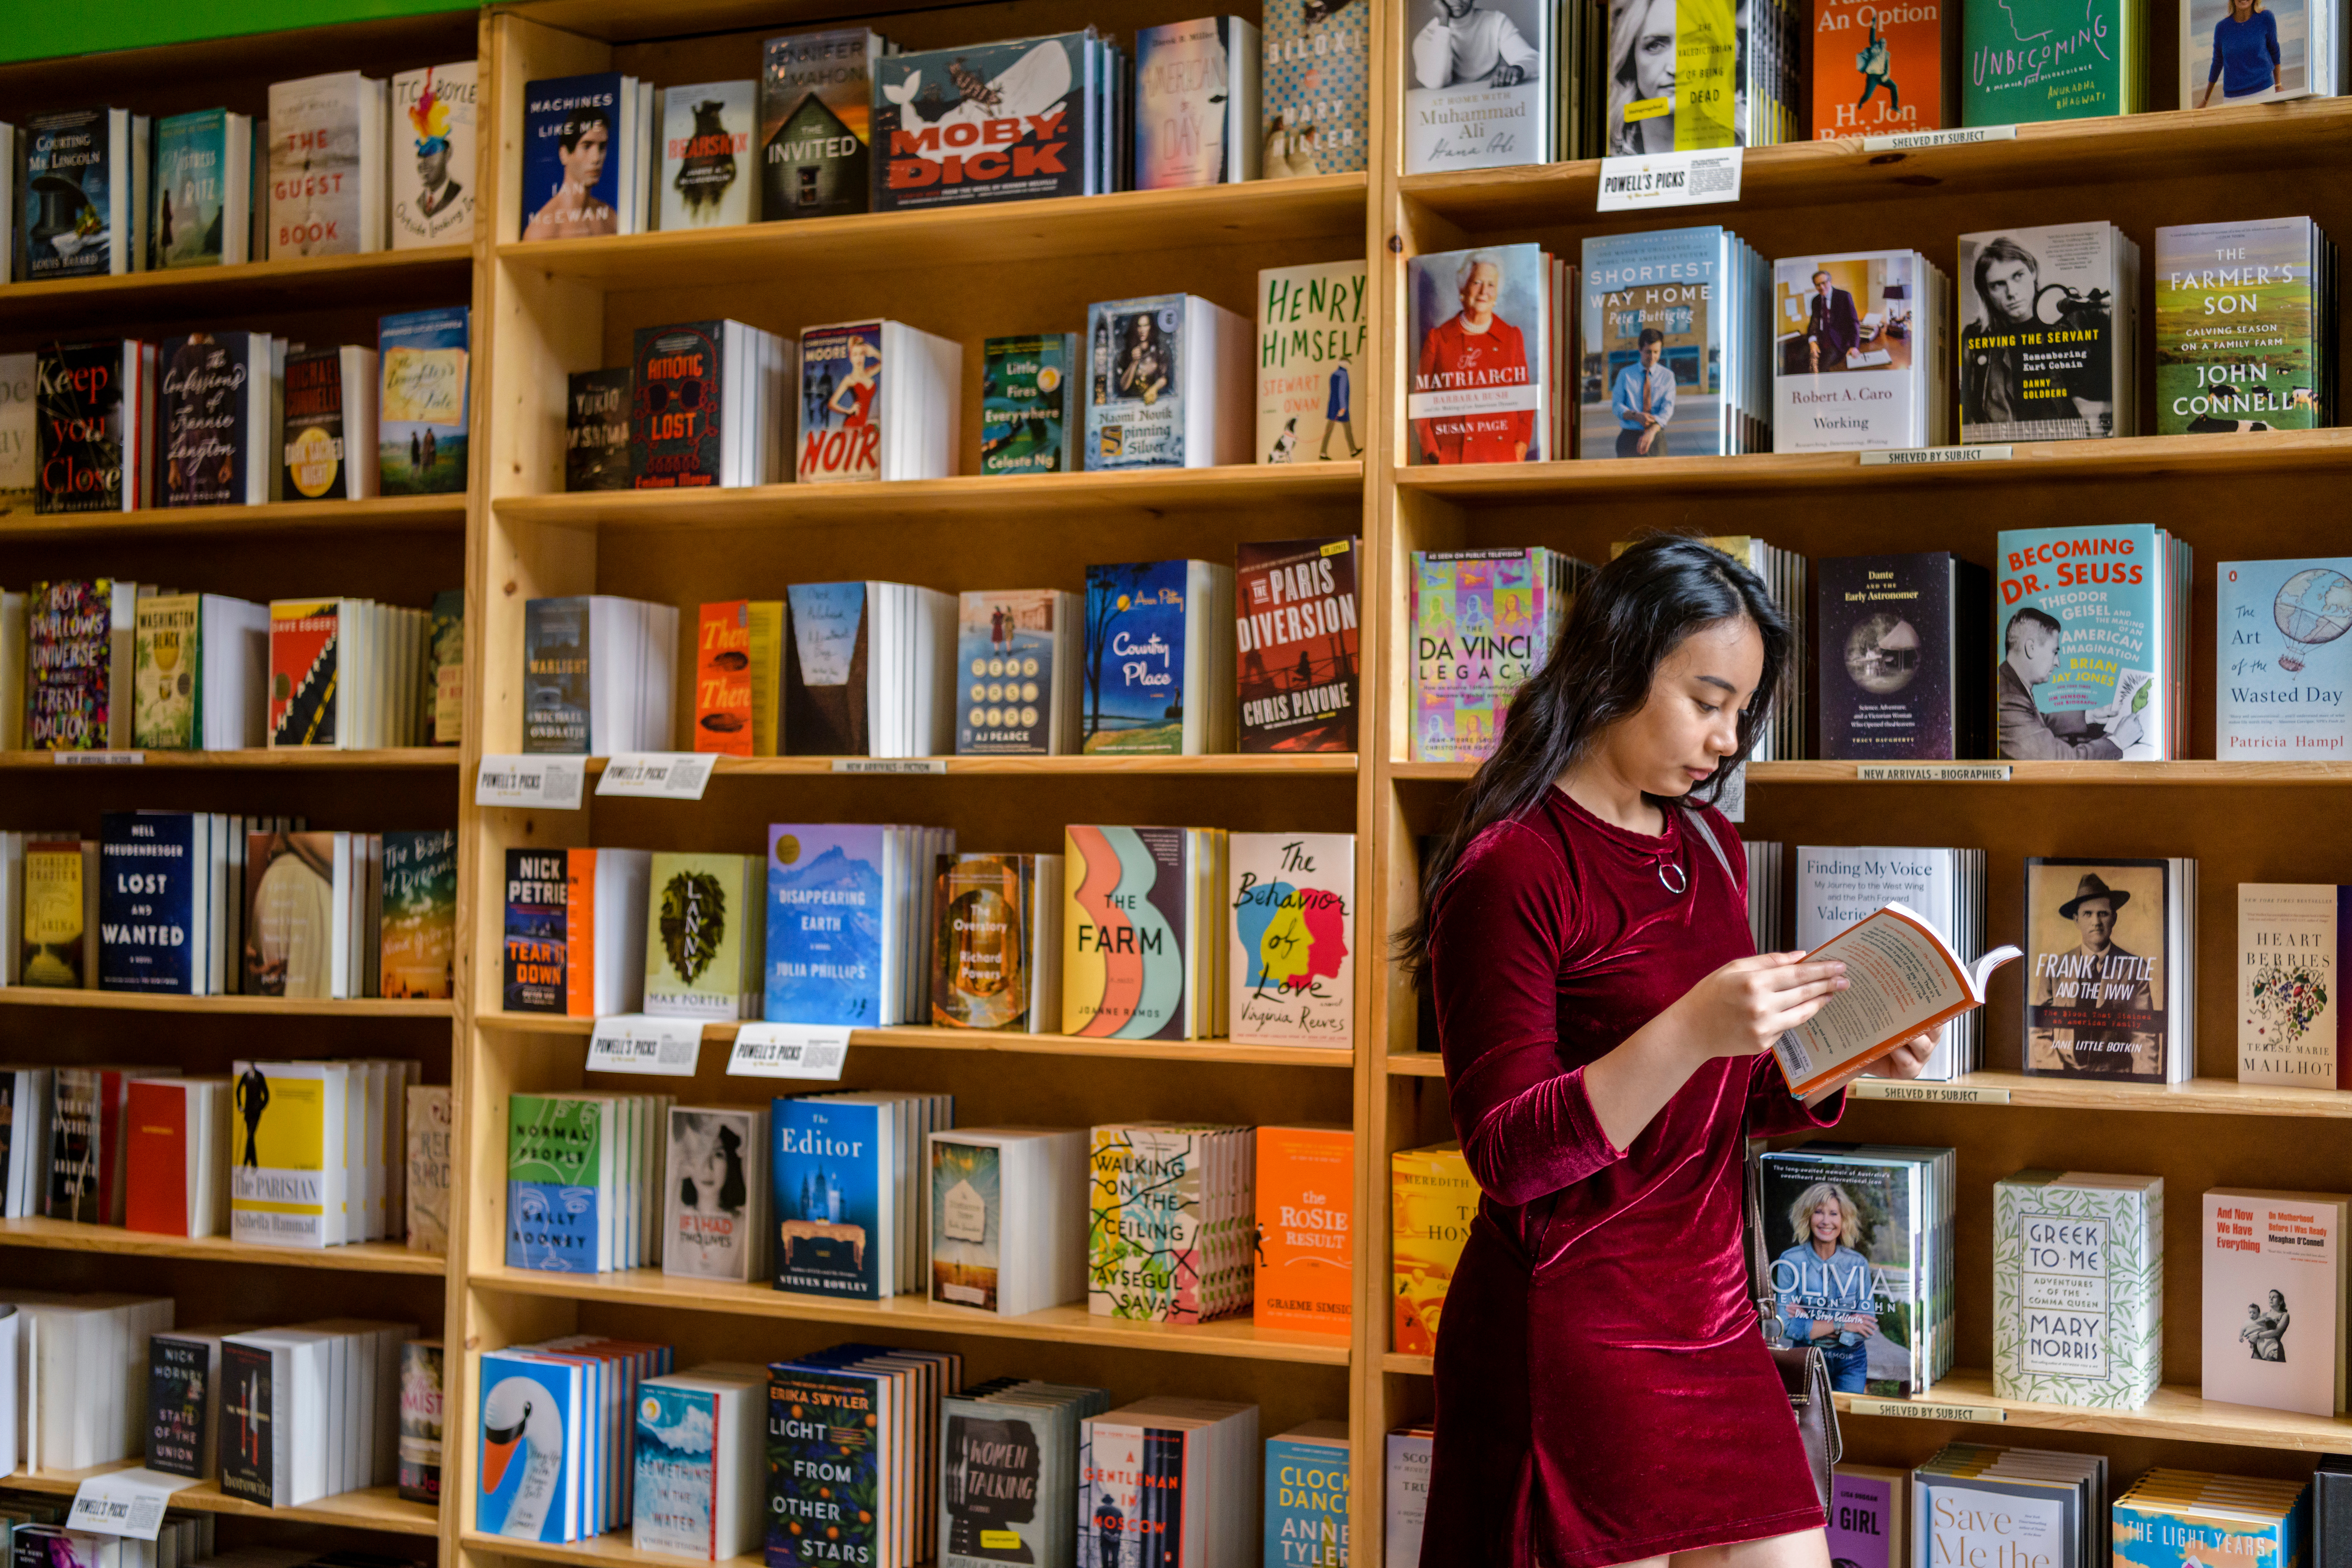 Student standing in front of bookshelves in a bookstore reading a book.